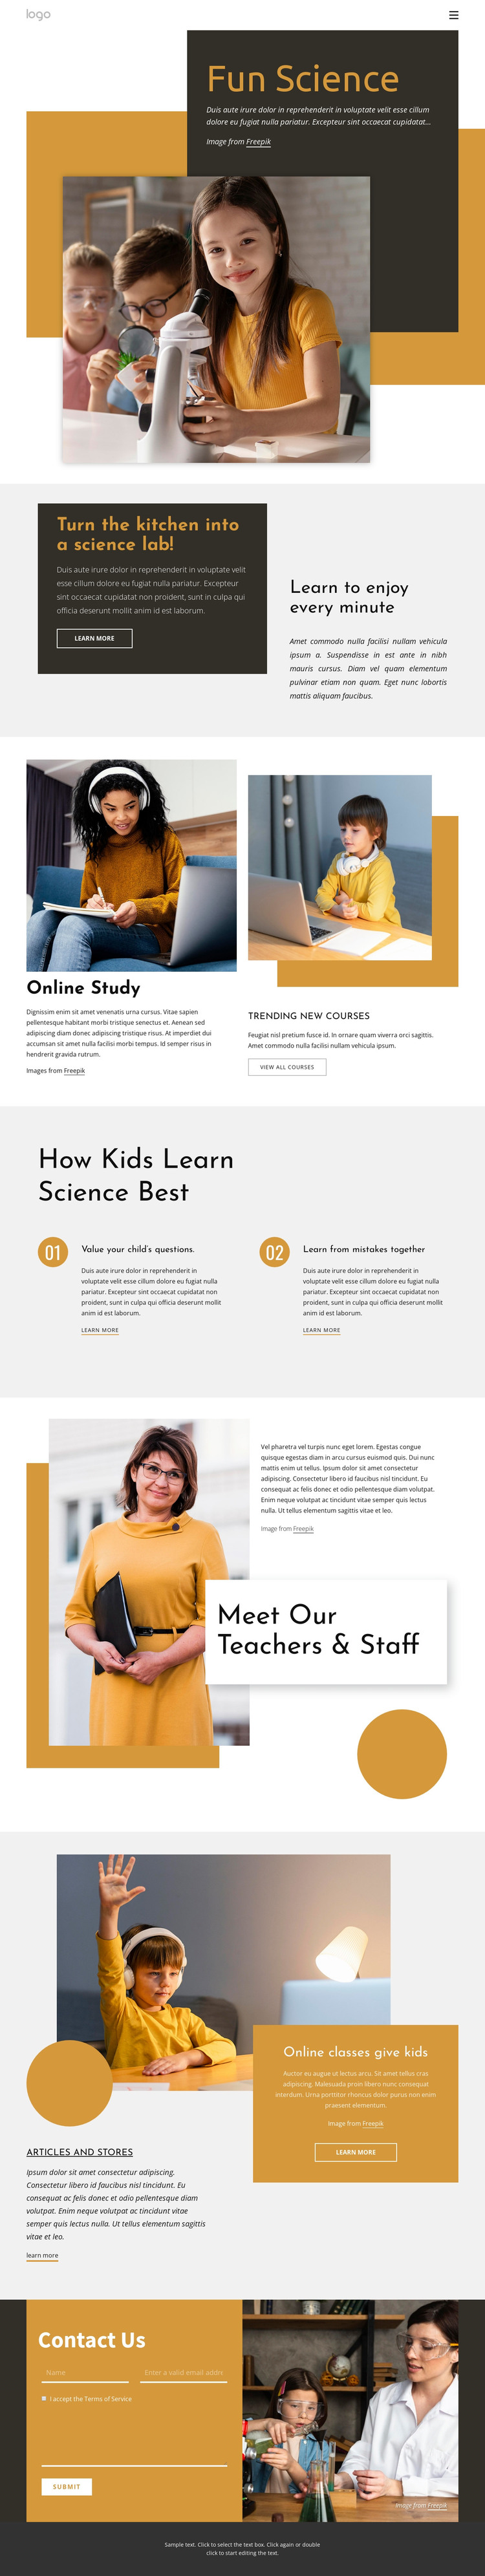 Cool science project Web Design